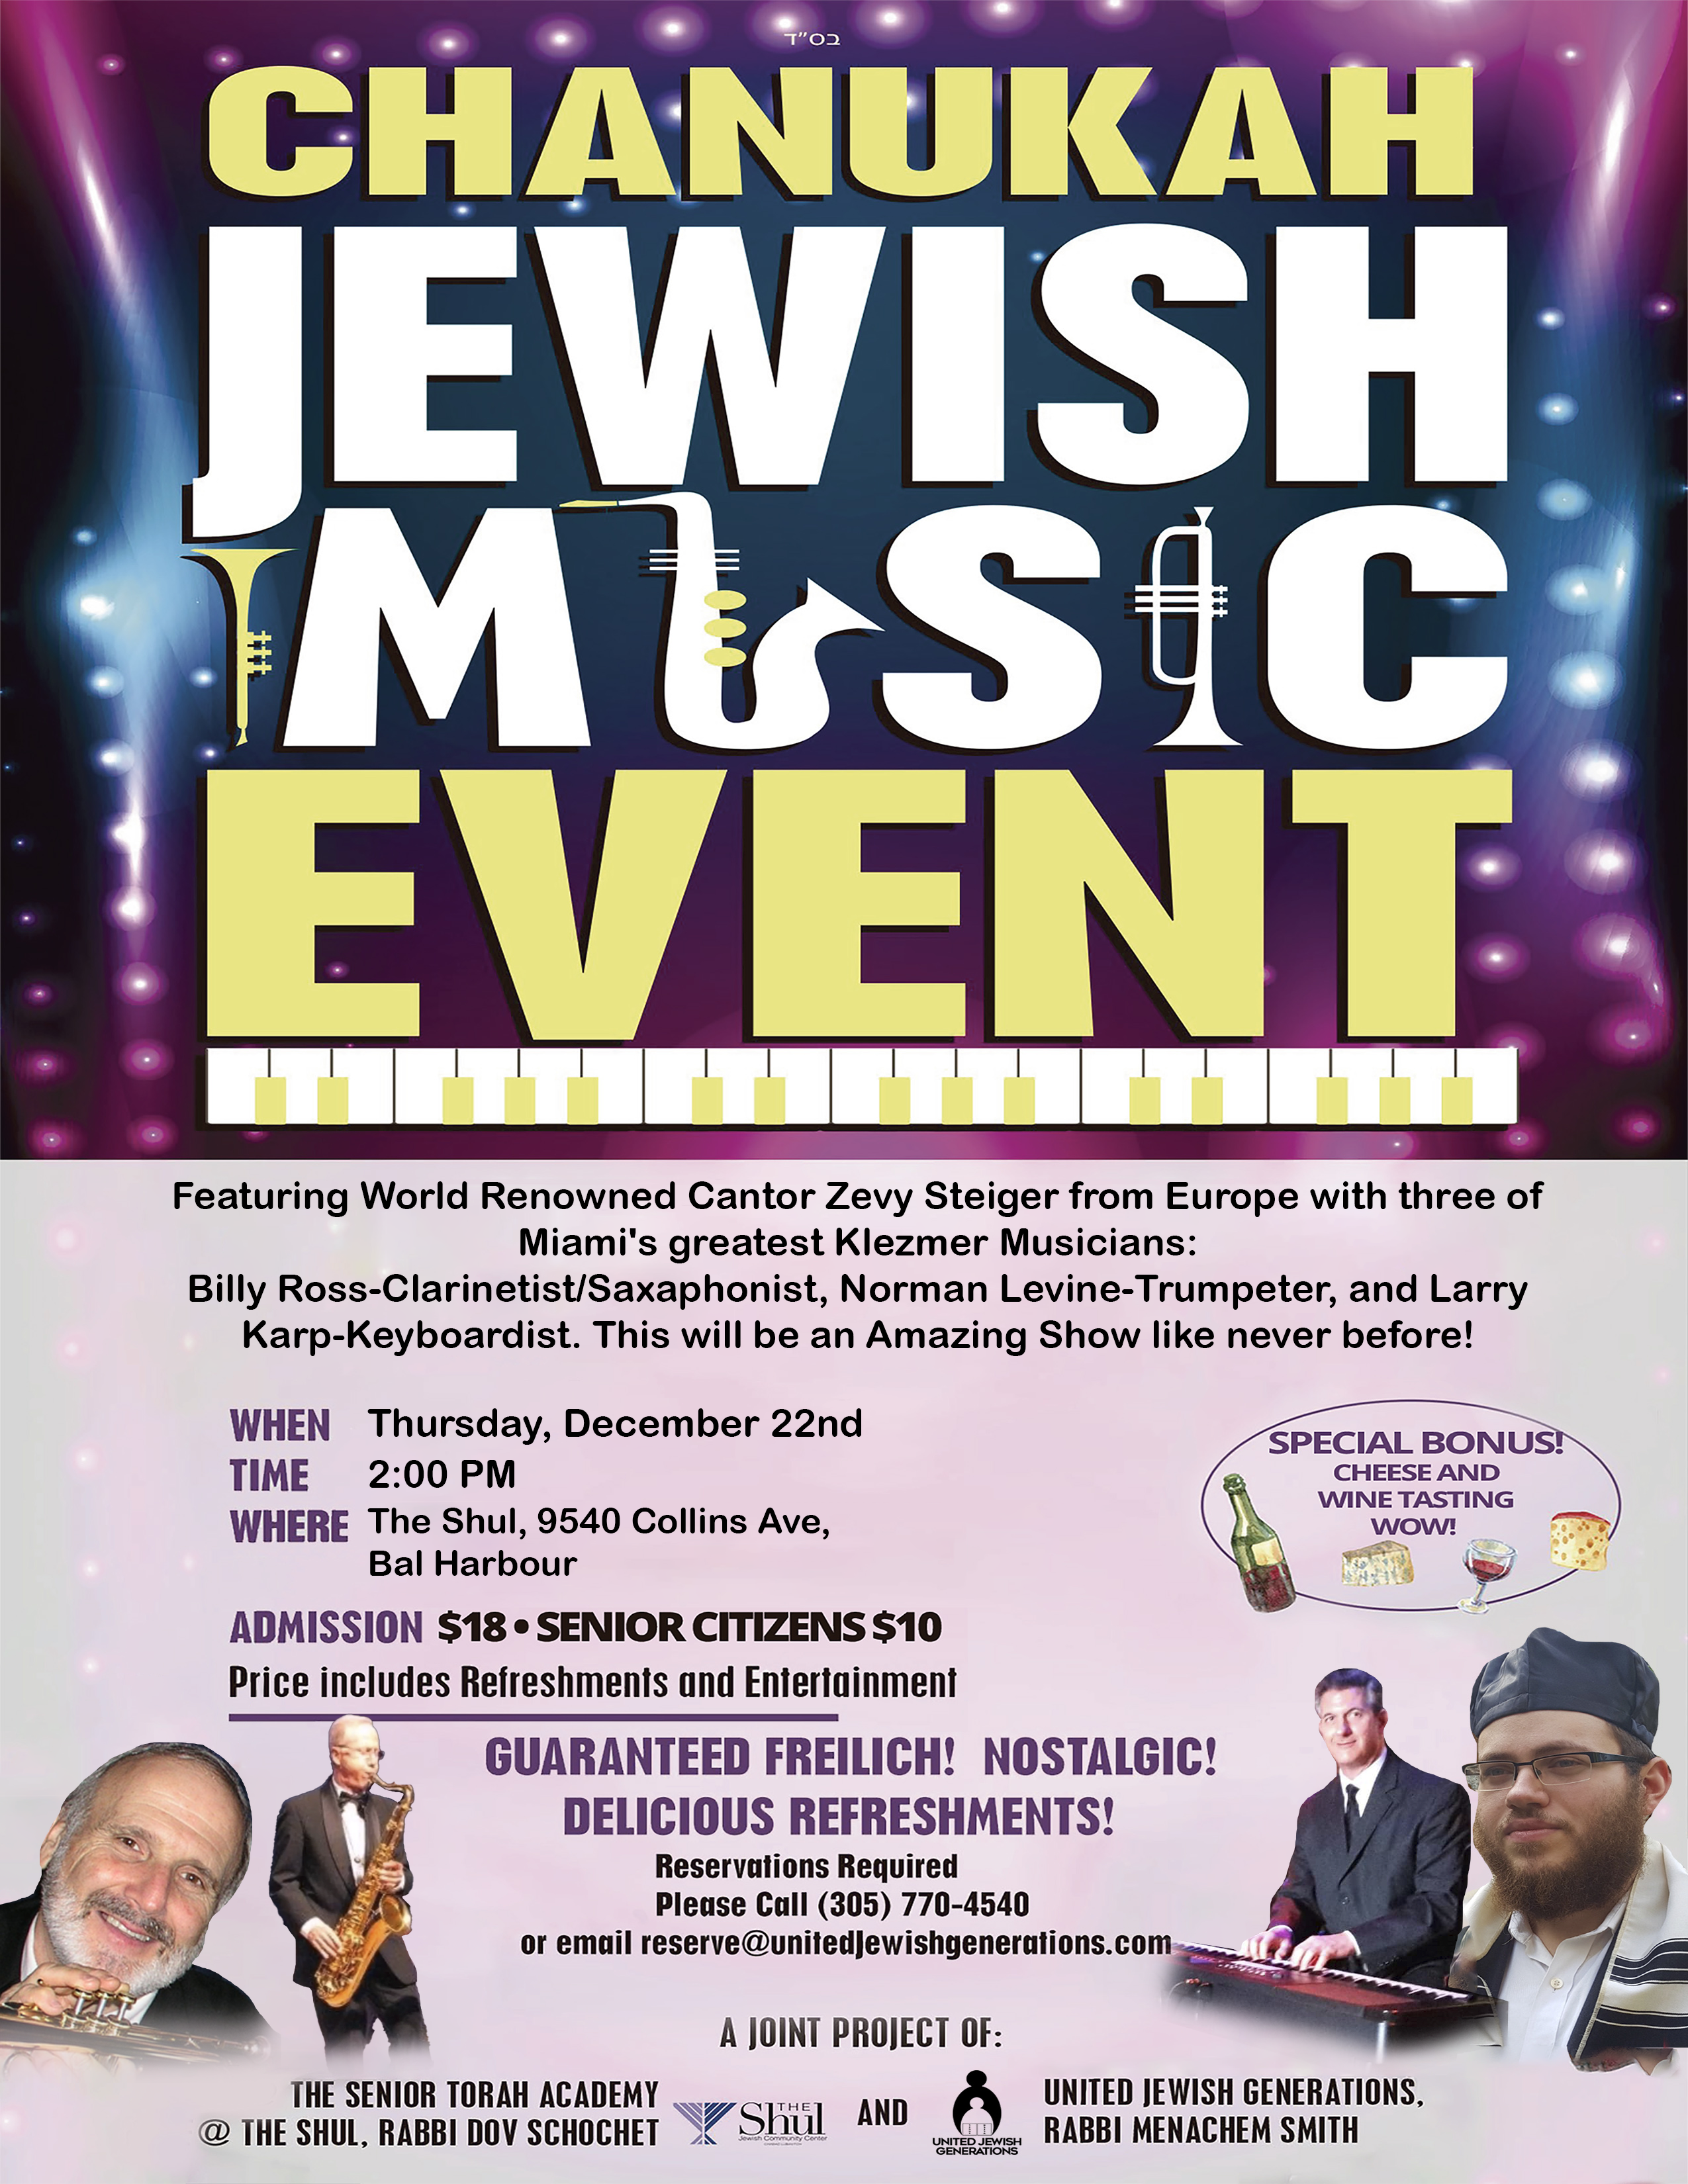 Amazing Show with great Klezmer Musicians and an outstanding Cantor from Belgium. Admission $10 for Seniors $18 for everyone else. Location: The Shul of Bal Harbour, 9540 Collins Ave. Thursday, Dec 22, at 2PM.